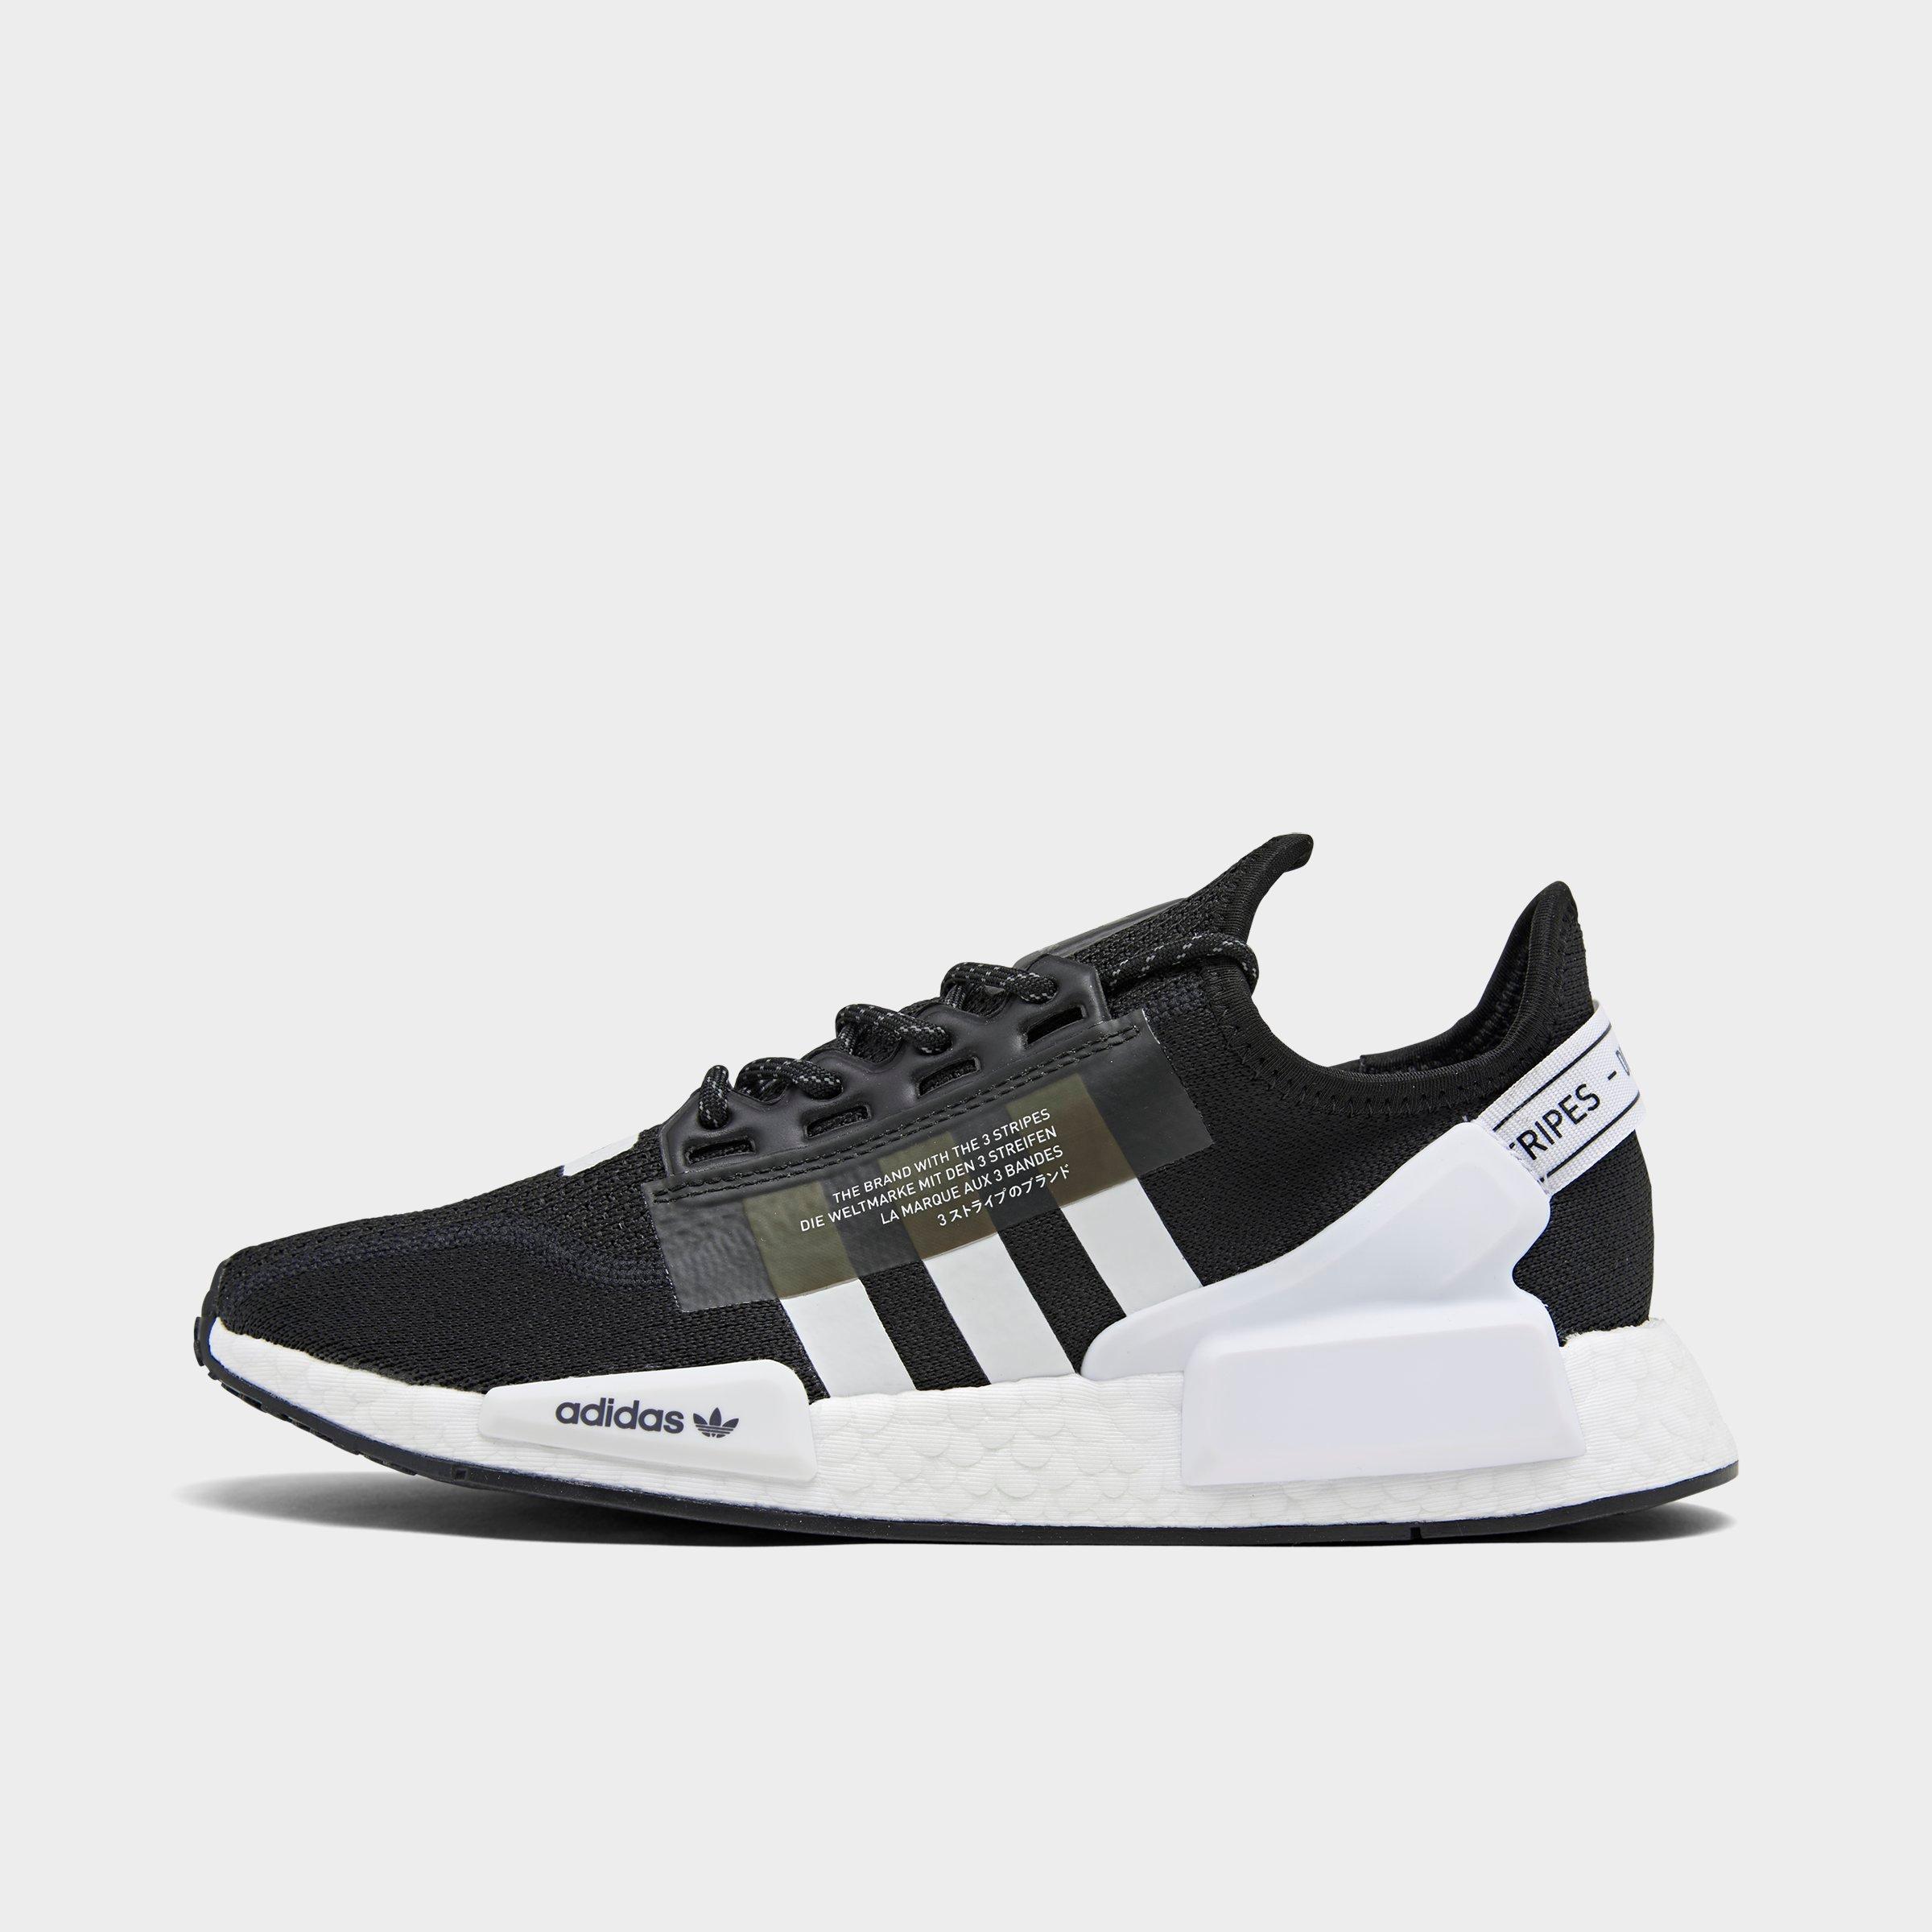 Adidas Shoes Nmd R1 White And Lavender Poshmark